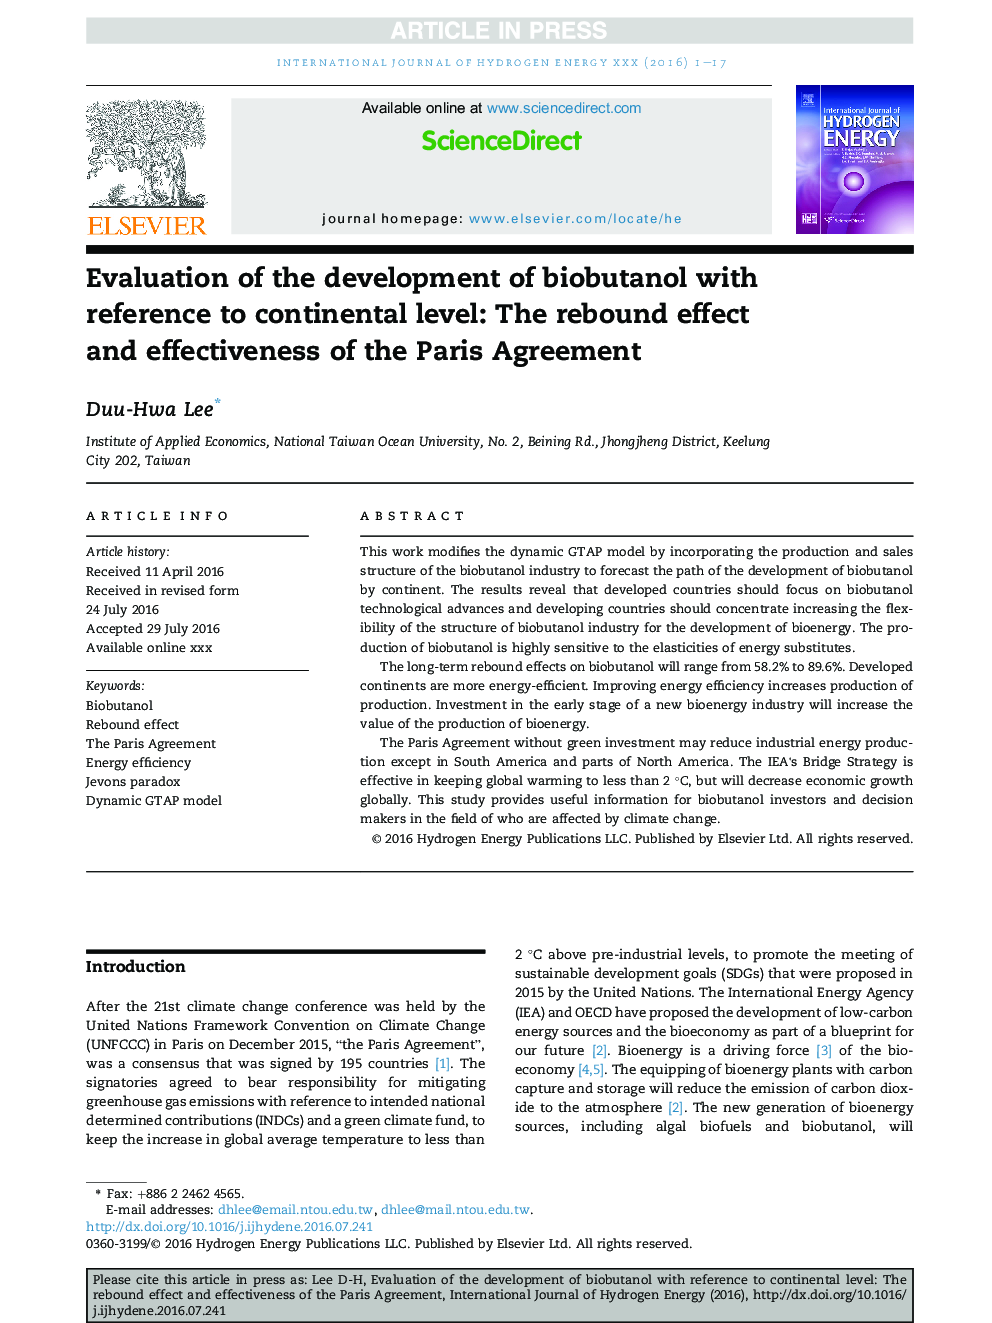 Evaluation of the development of biobutanol with reference to continental level: The rebound effect and effectiveness of the Paris Agreement